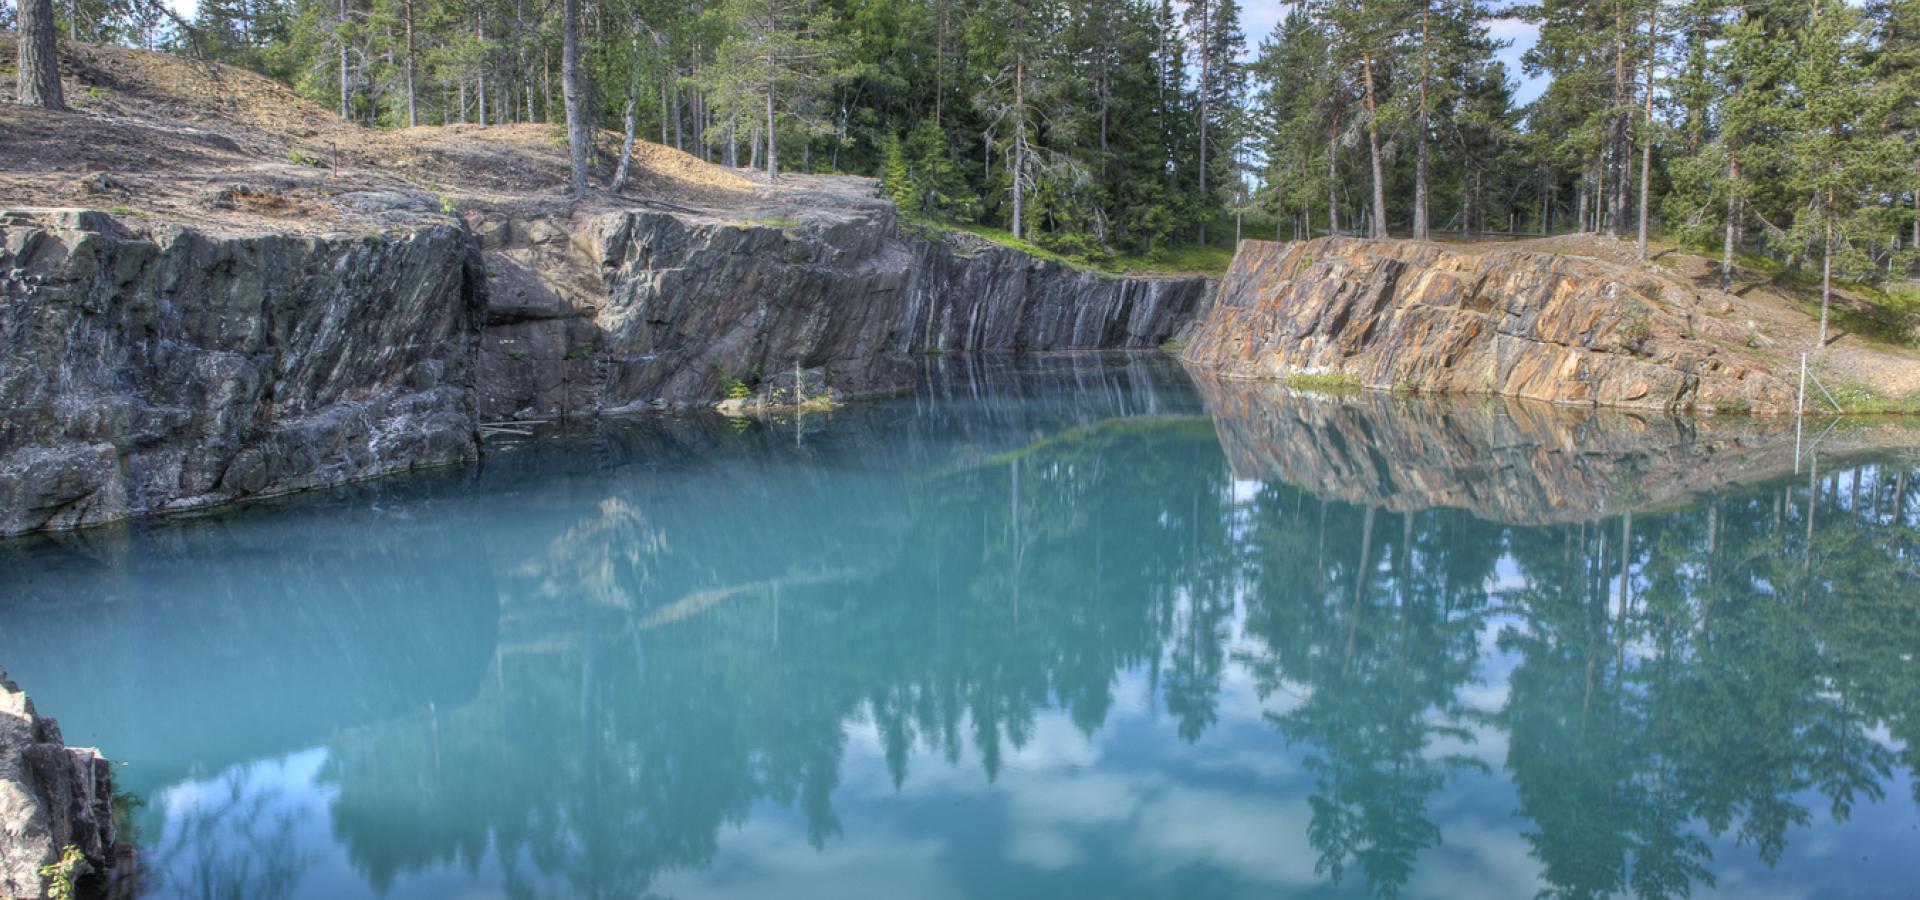 Turquoise Water in a limestone quarry.